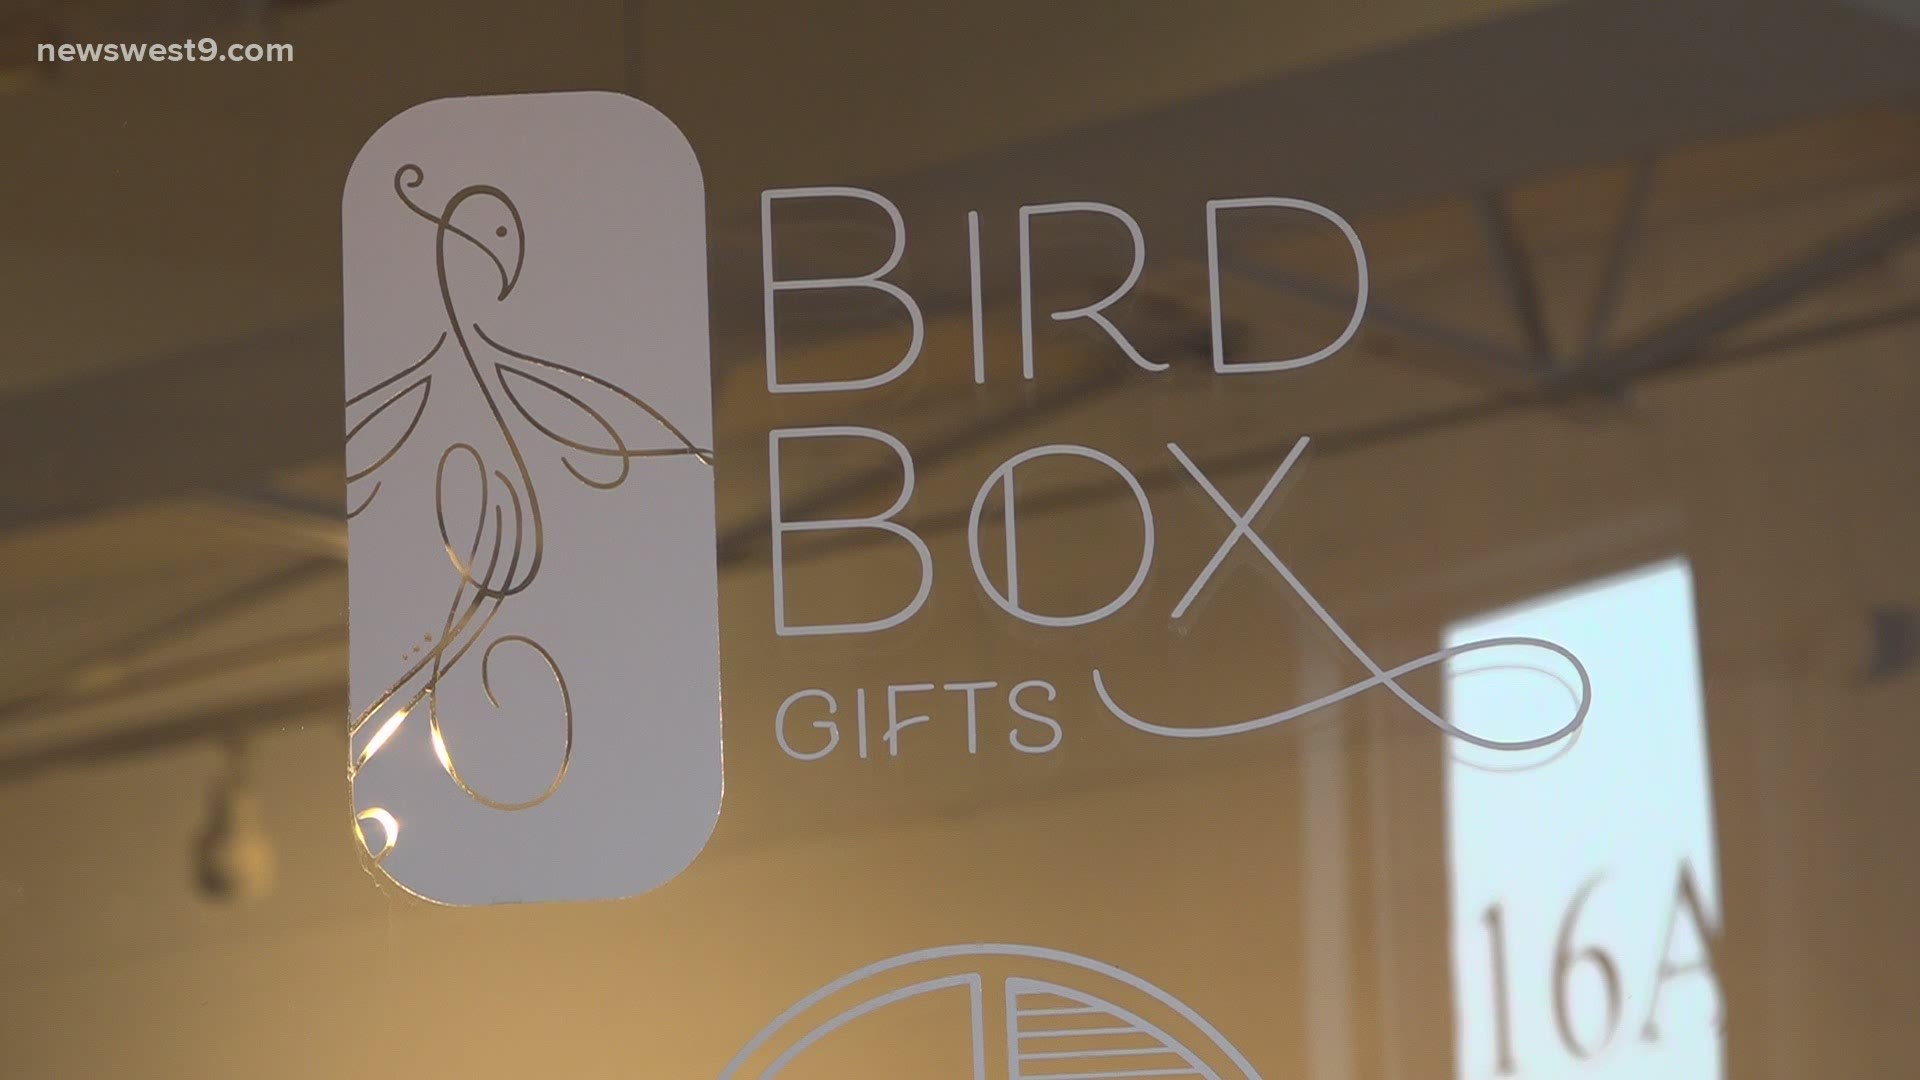 Bird Box Gifts is taking a customer service approach.